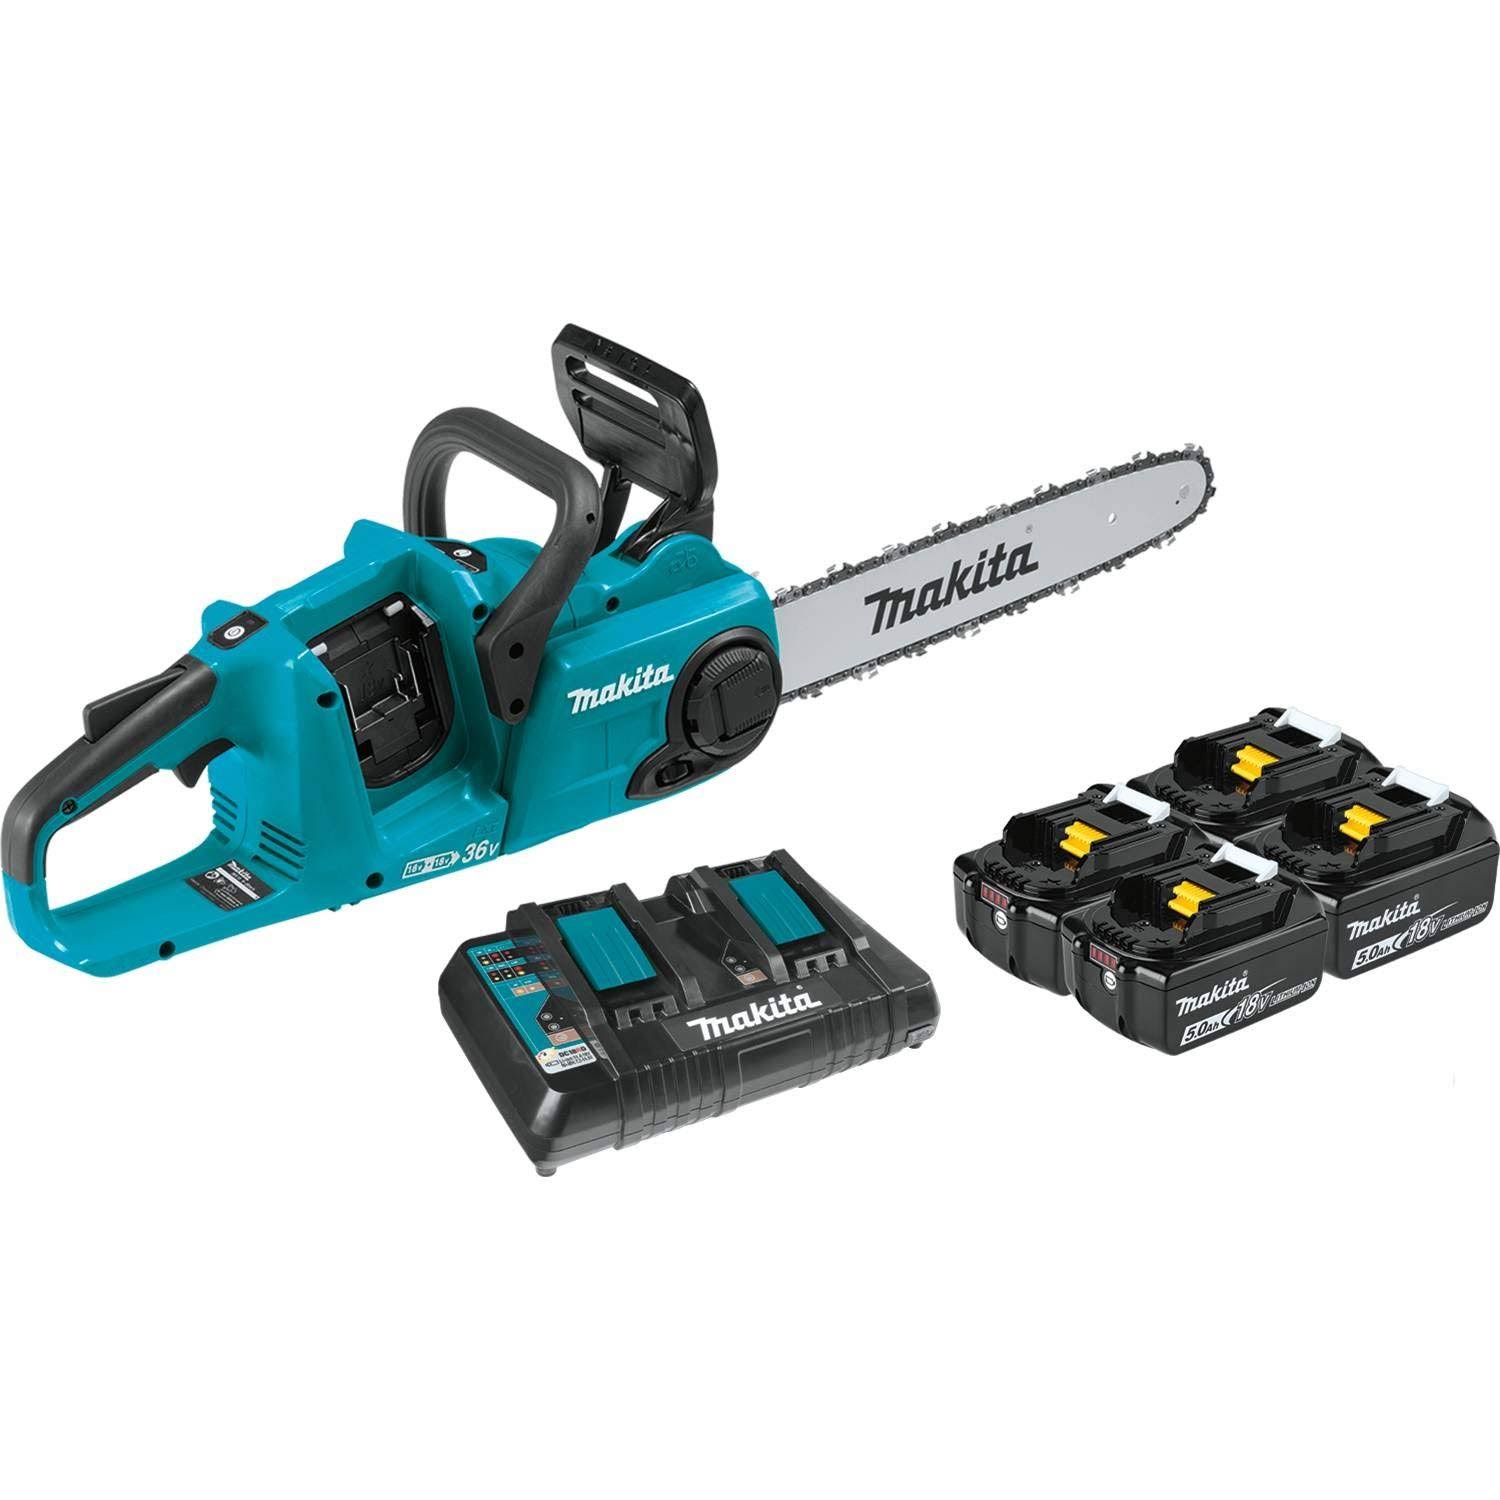 Makita Lithium-Ion Brushless Cordless Chain Saw Kit - with 4 Batteries, 5.0Ah and Charger